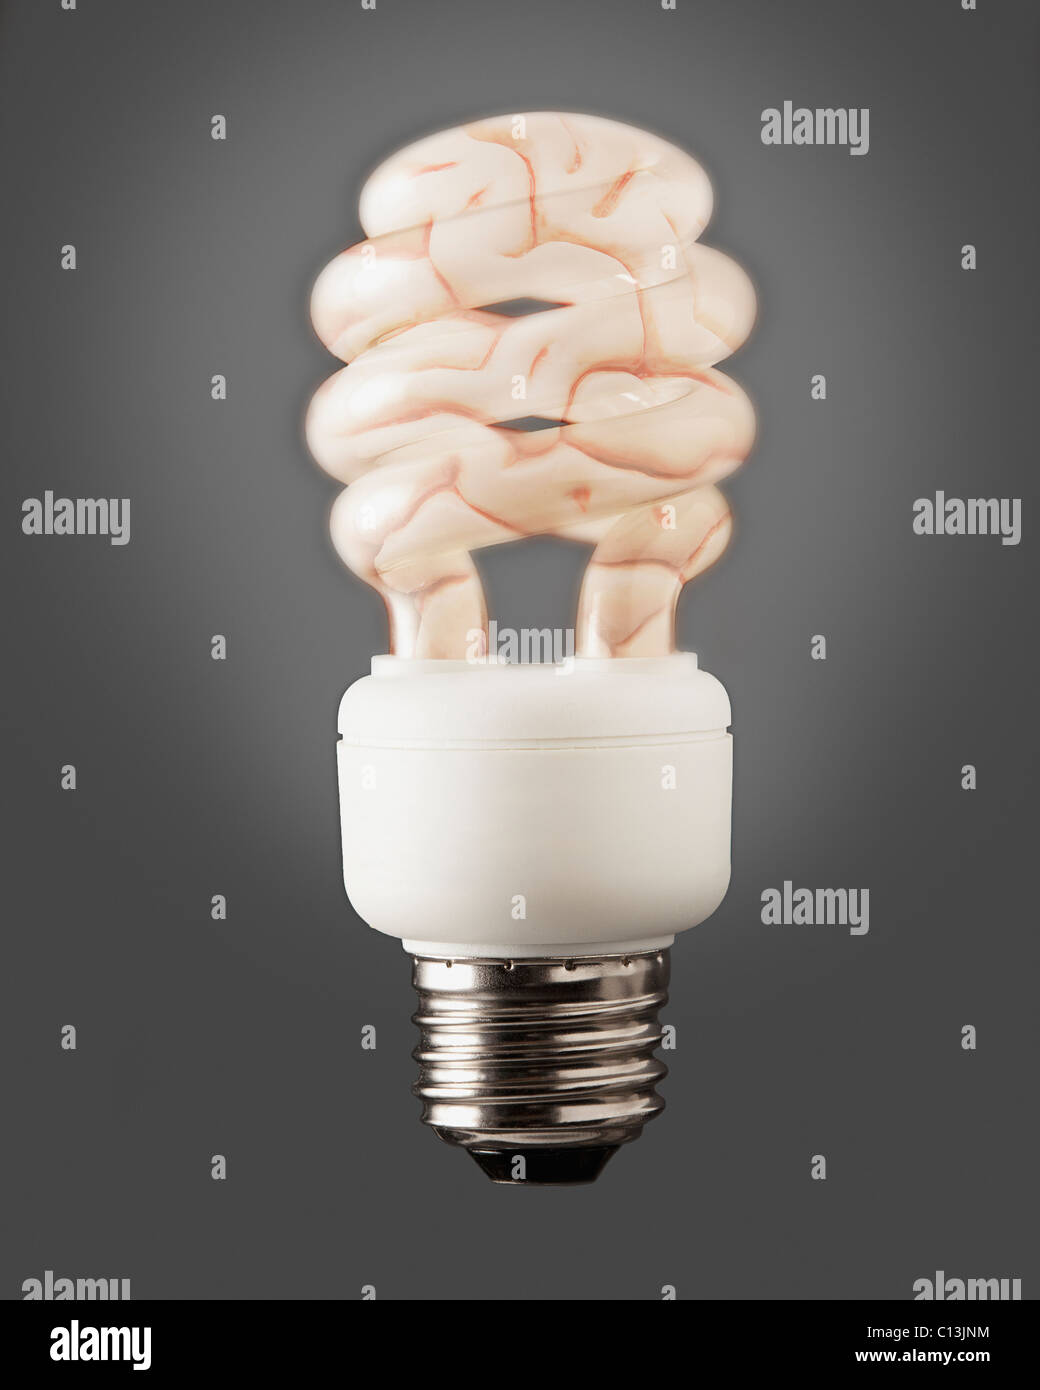 Composition of energy efficient bulb and human brain Stock Photo